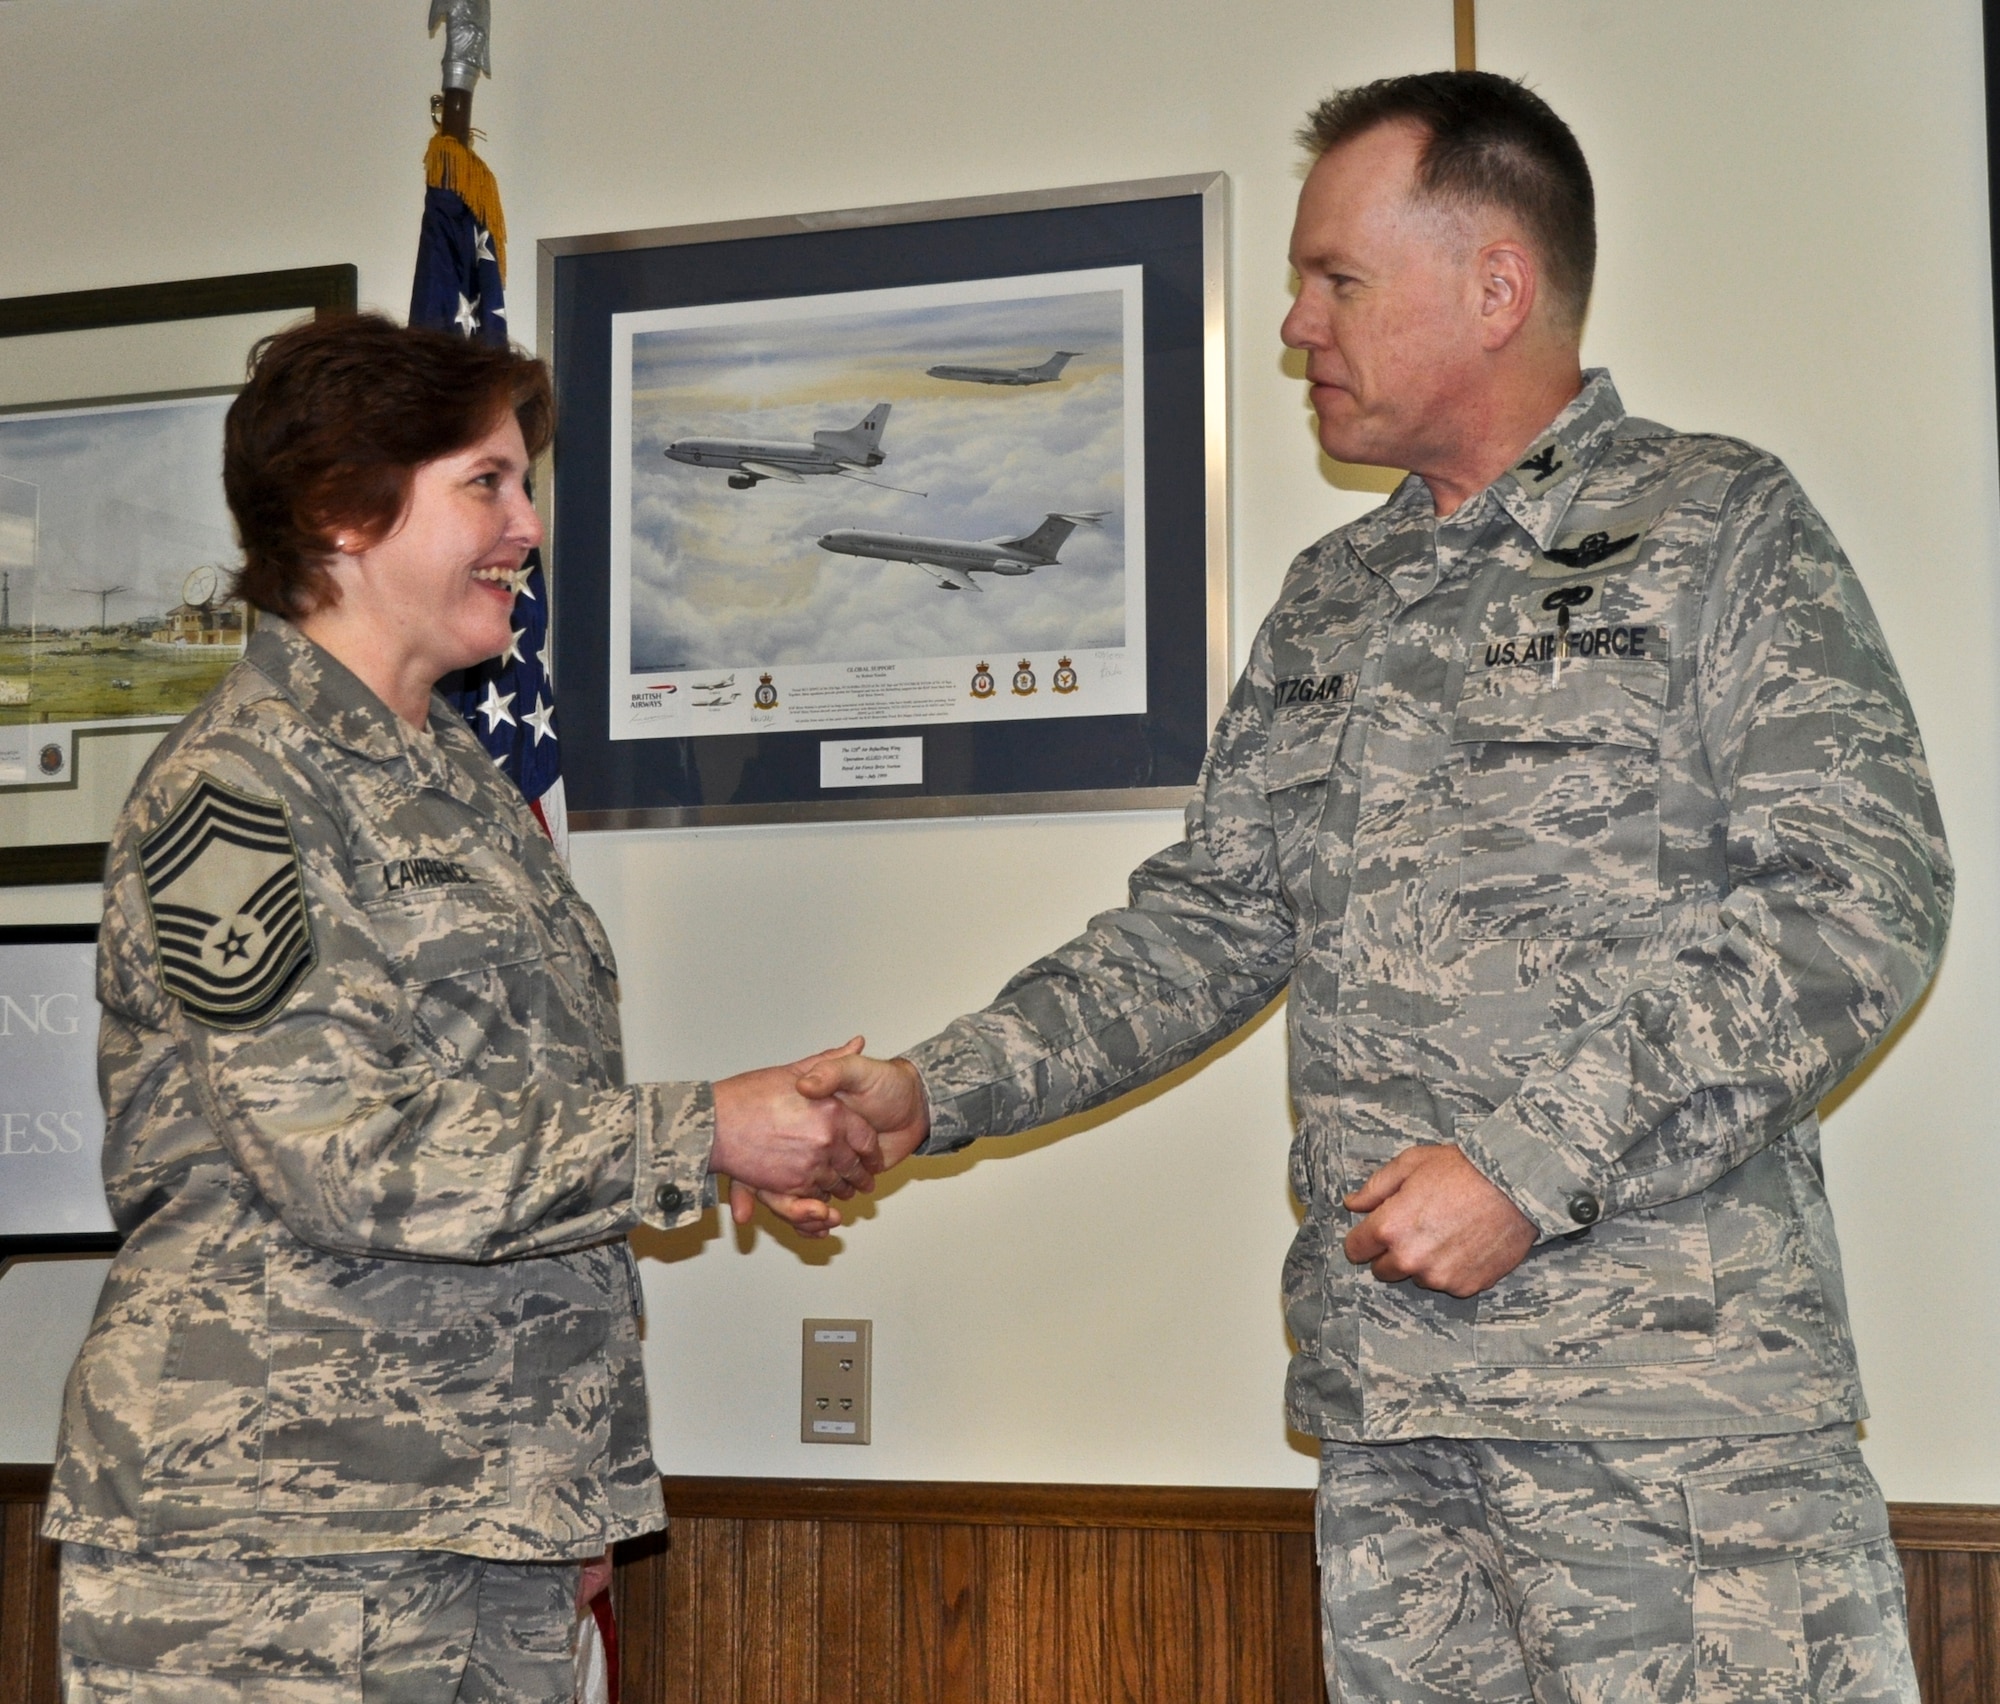 Chief Master Sgt. Kelly Lawrence, the 128th Air Refueling Wing command post superintendent, receives a Wing challenge coin from Col. Ted Metzgar, the 128th Air Refueling Wing commander, during a congratulatory handshake on Sunday, May 15, 2011.  Lawrence was promoted to the rank of chief master sergeant on Sunday during the Wing's May drill at Gen. Mitchell International Airport, Milwaukee.